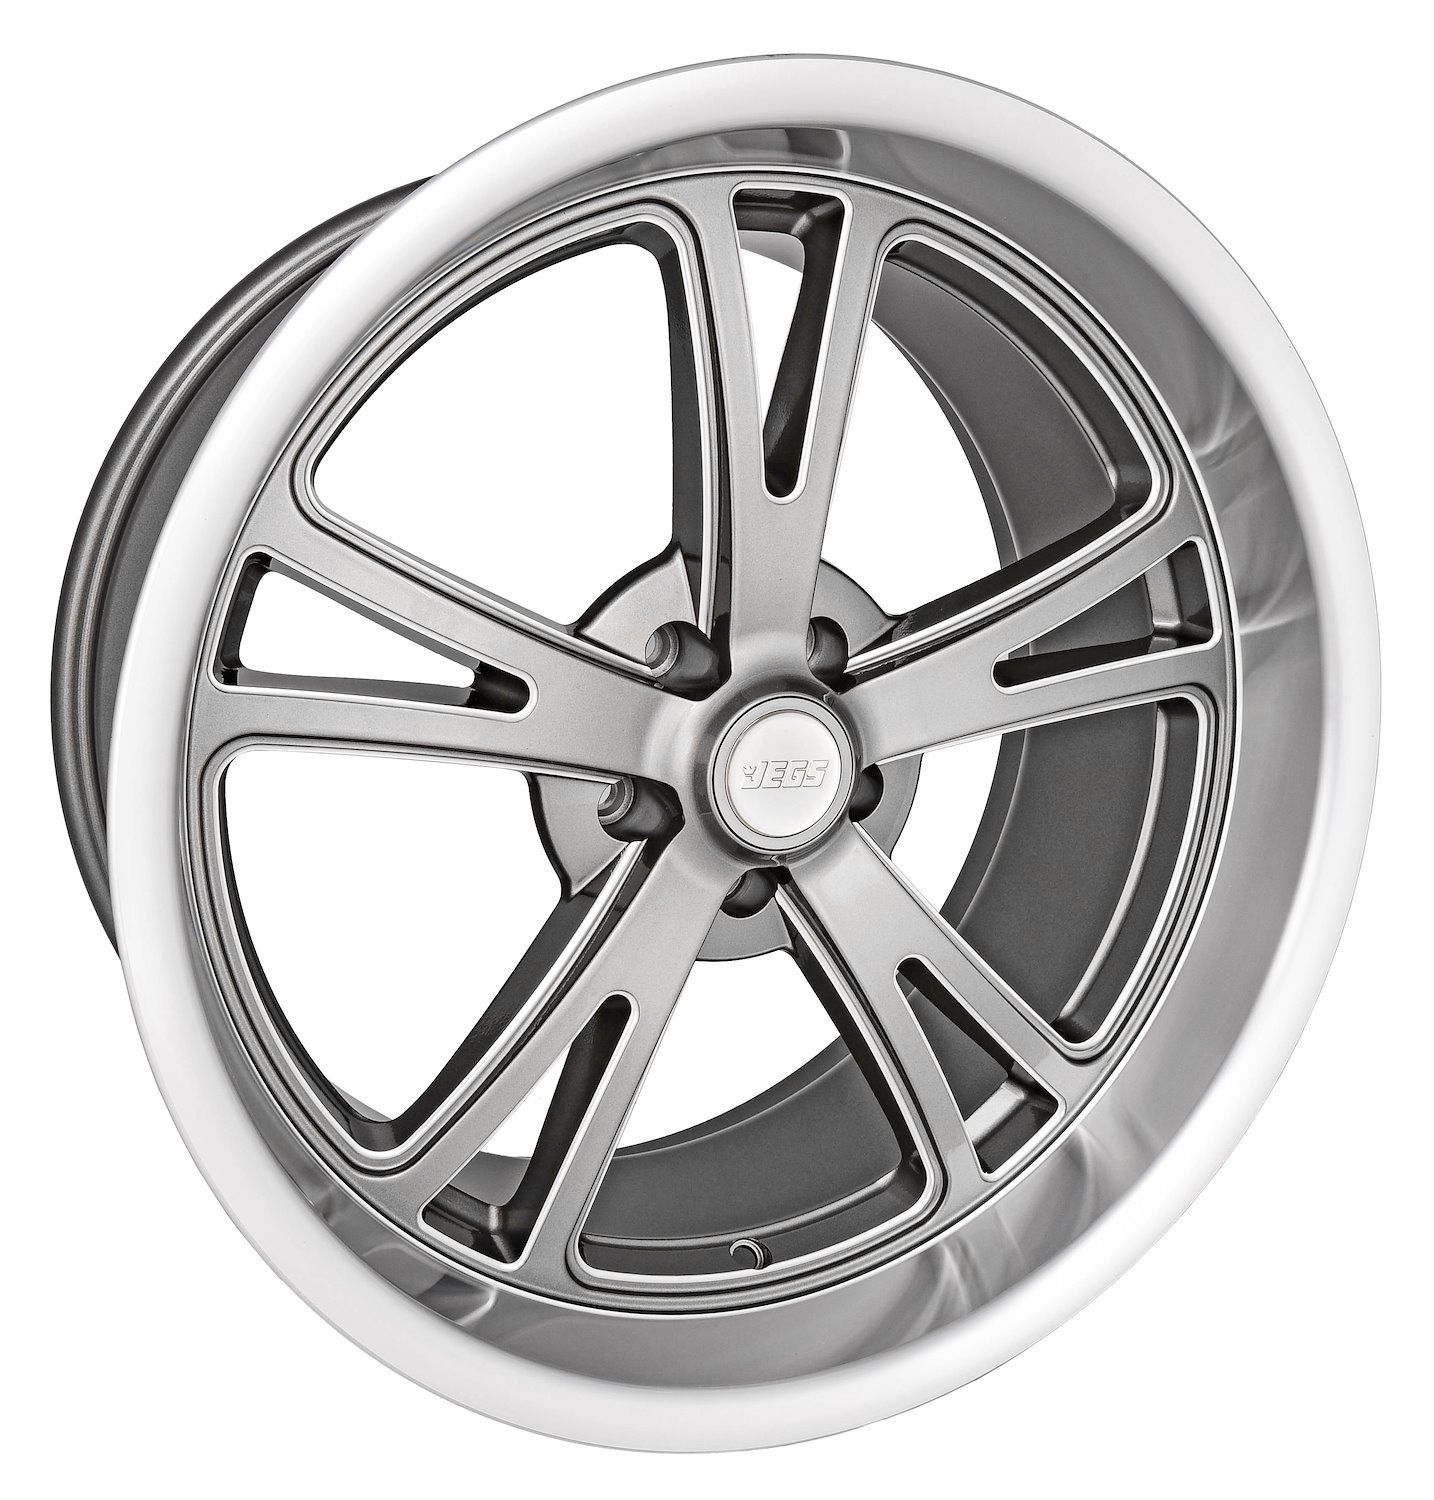 JV-1 Wheel [Size: 20" x 10"] Grey Spokes with Milled Outer Lip